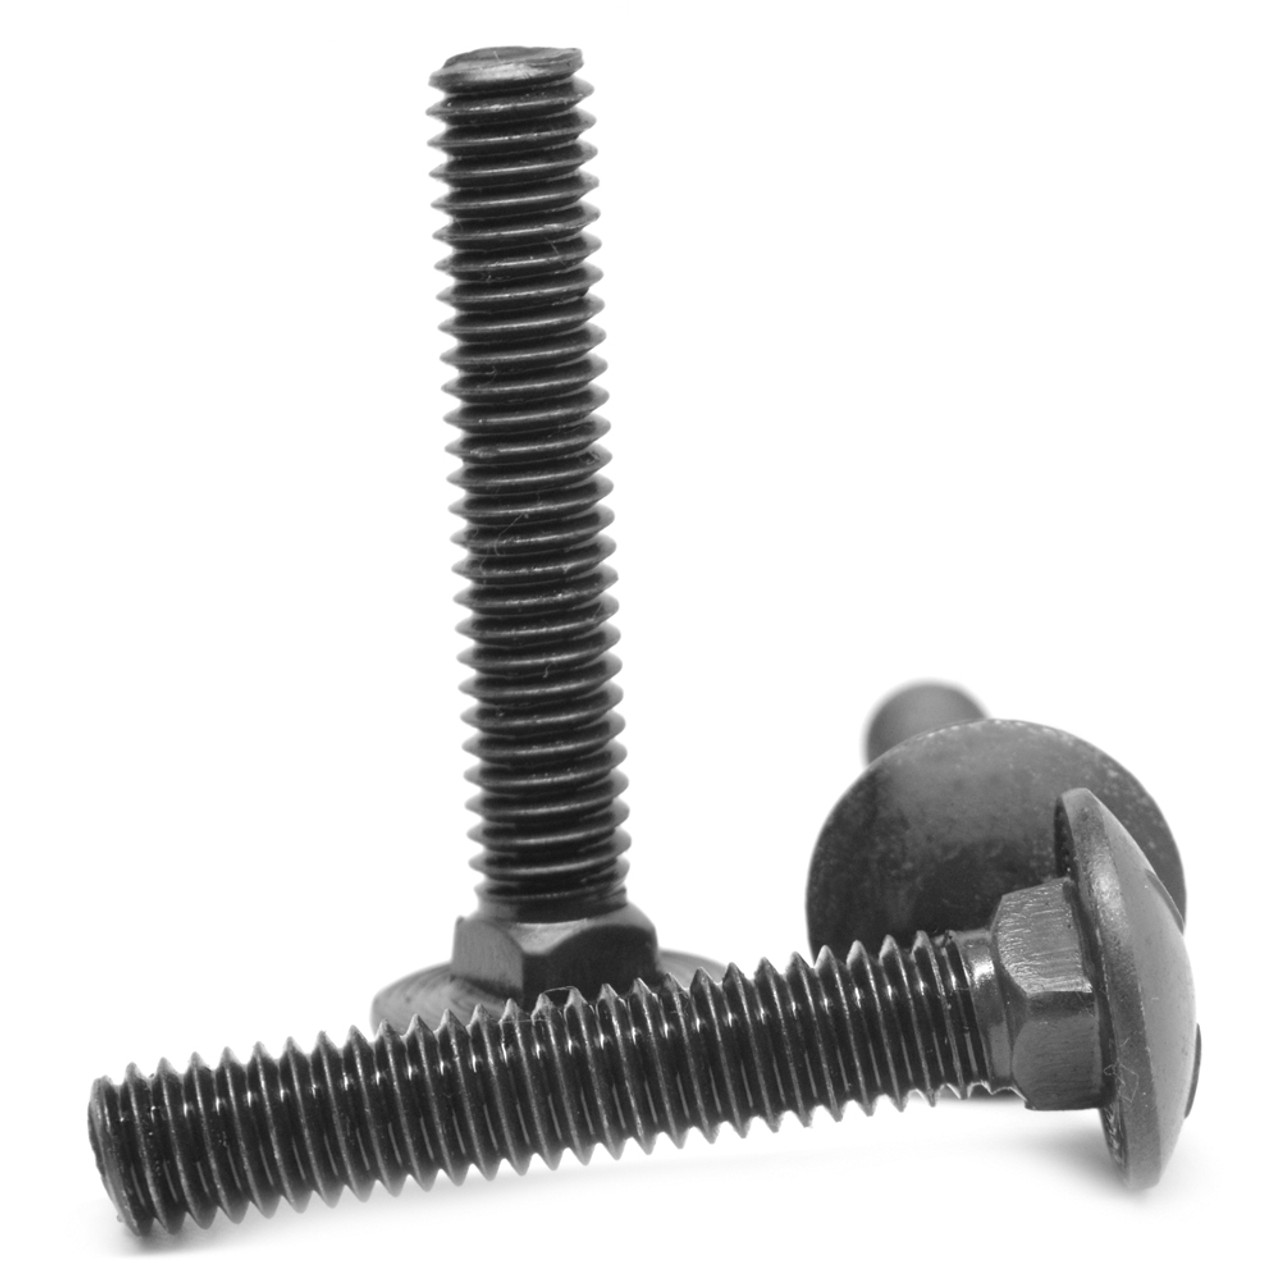 5/8-11 x 5 (FT) Coarse Thread Grade 8 Carriage Bolt Alloy Steel Thermal Black Oxide